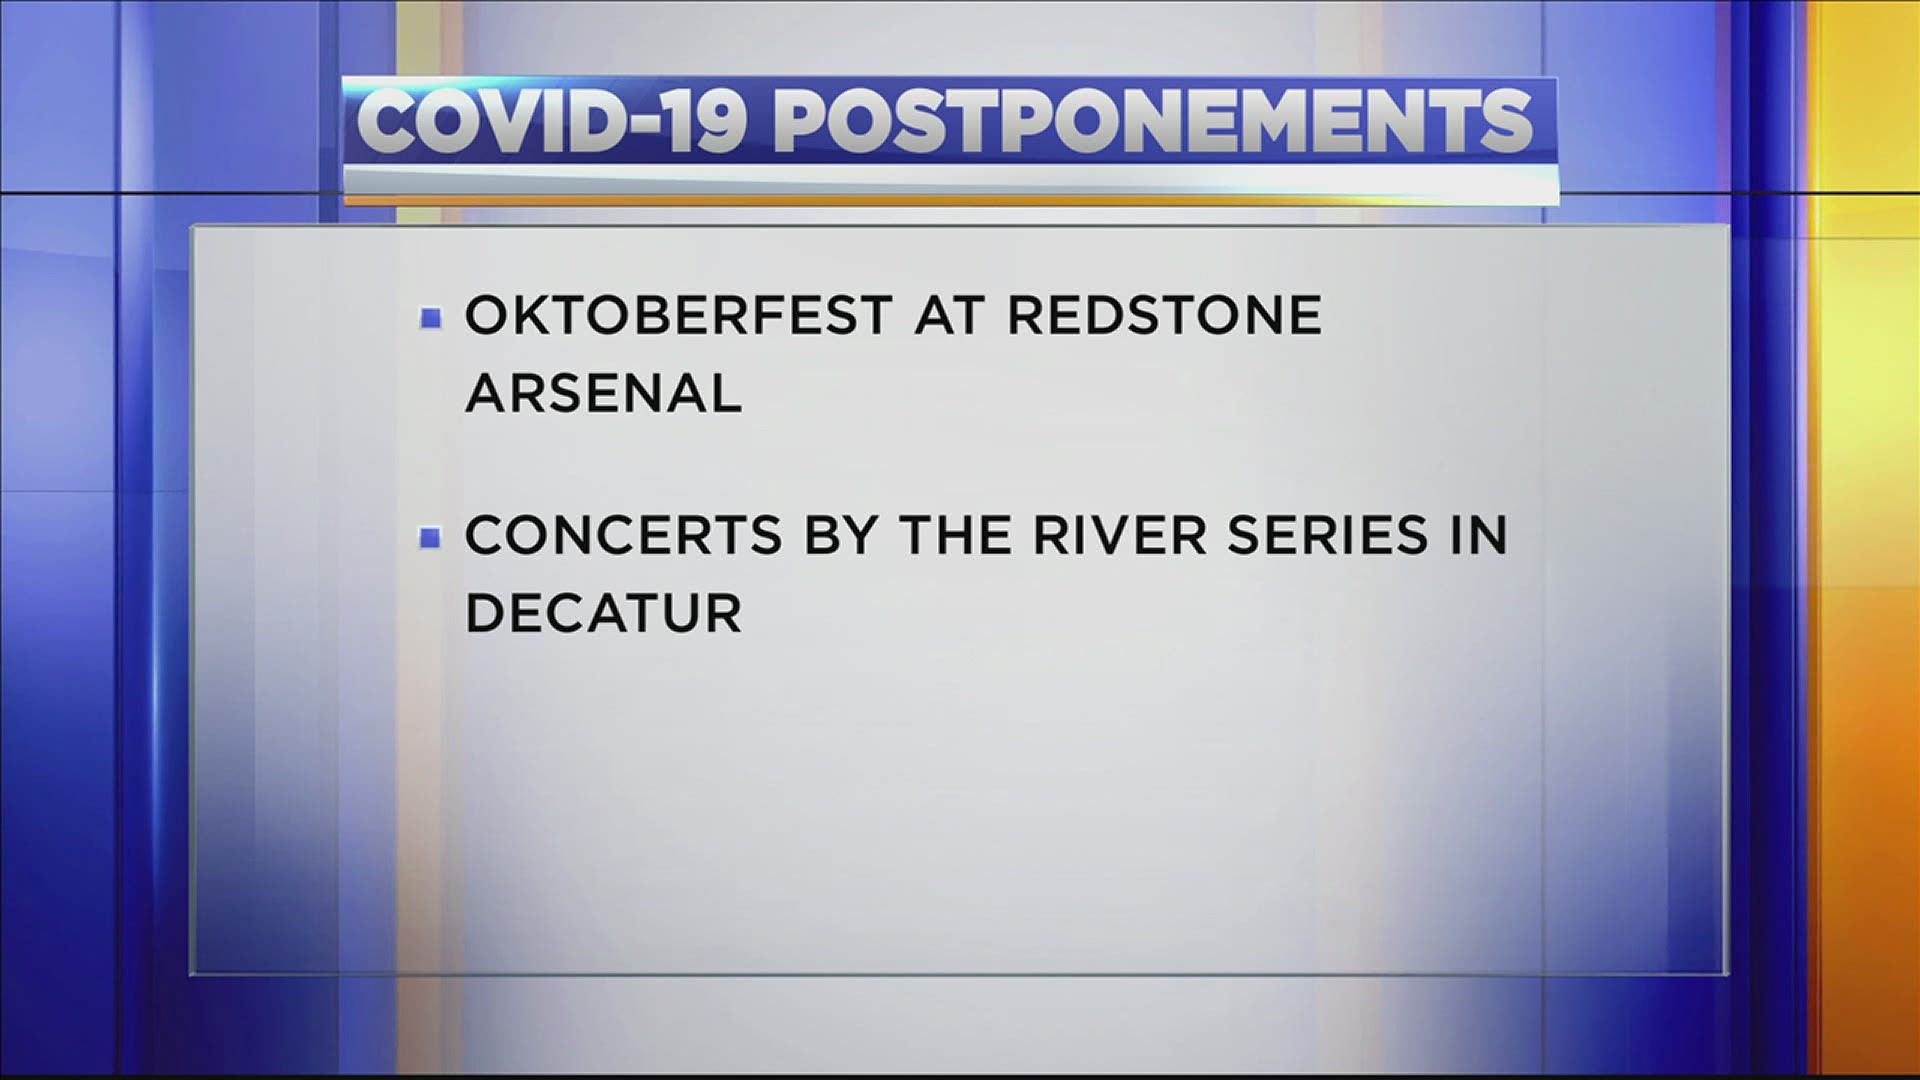 The popular concert series has been postponed due to COVID-19 concerns.